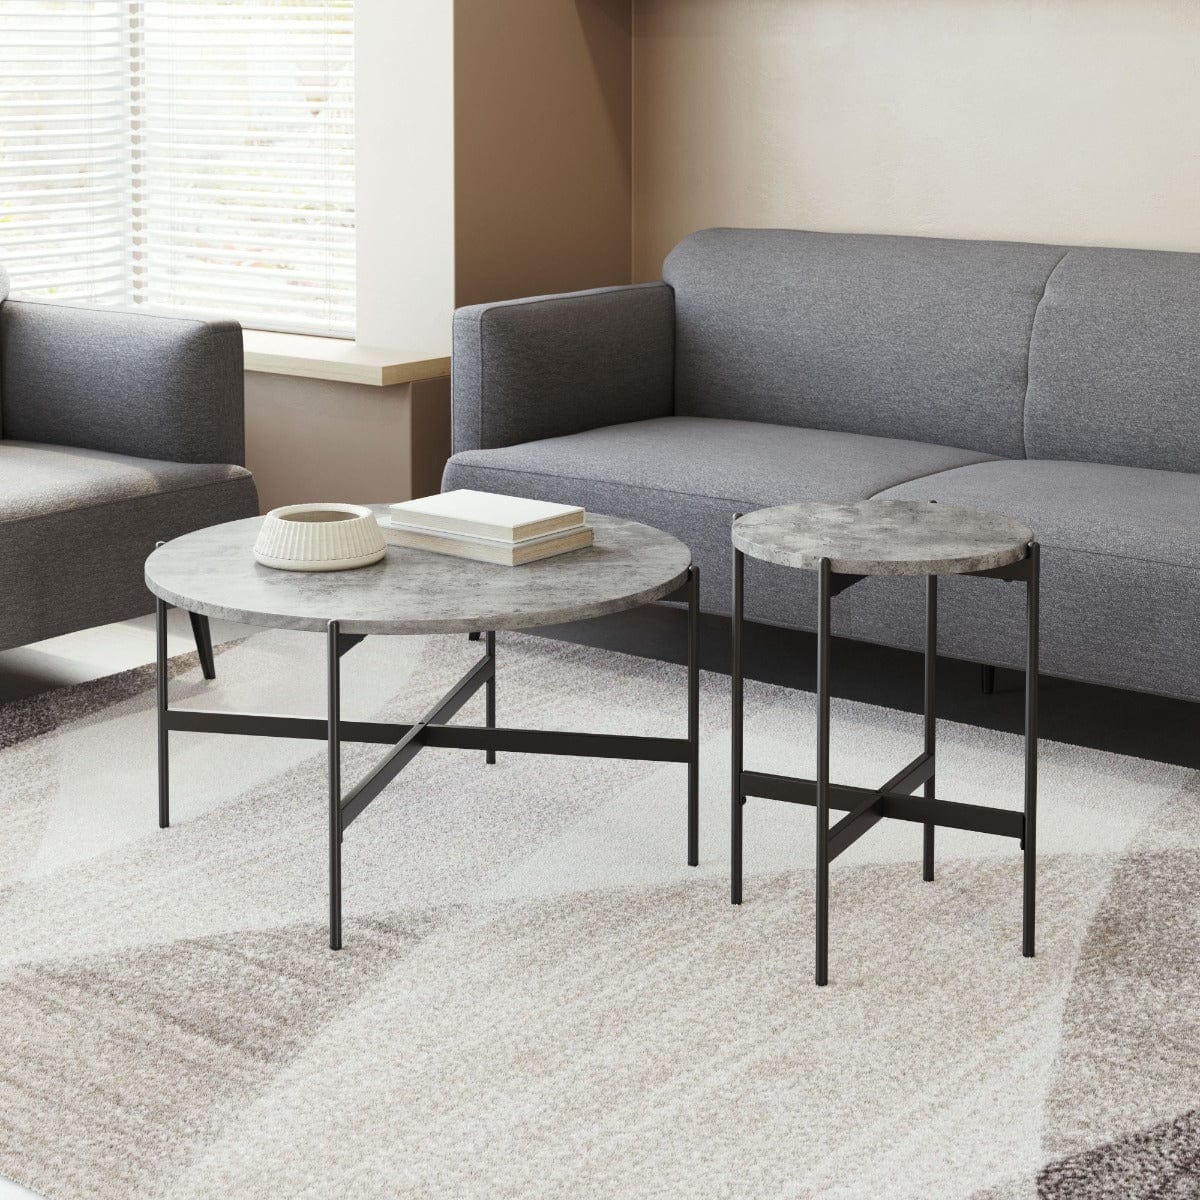 Malo Set of modern industrial accent tables